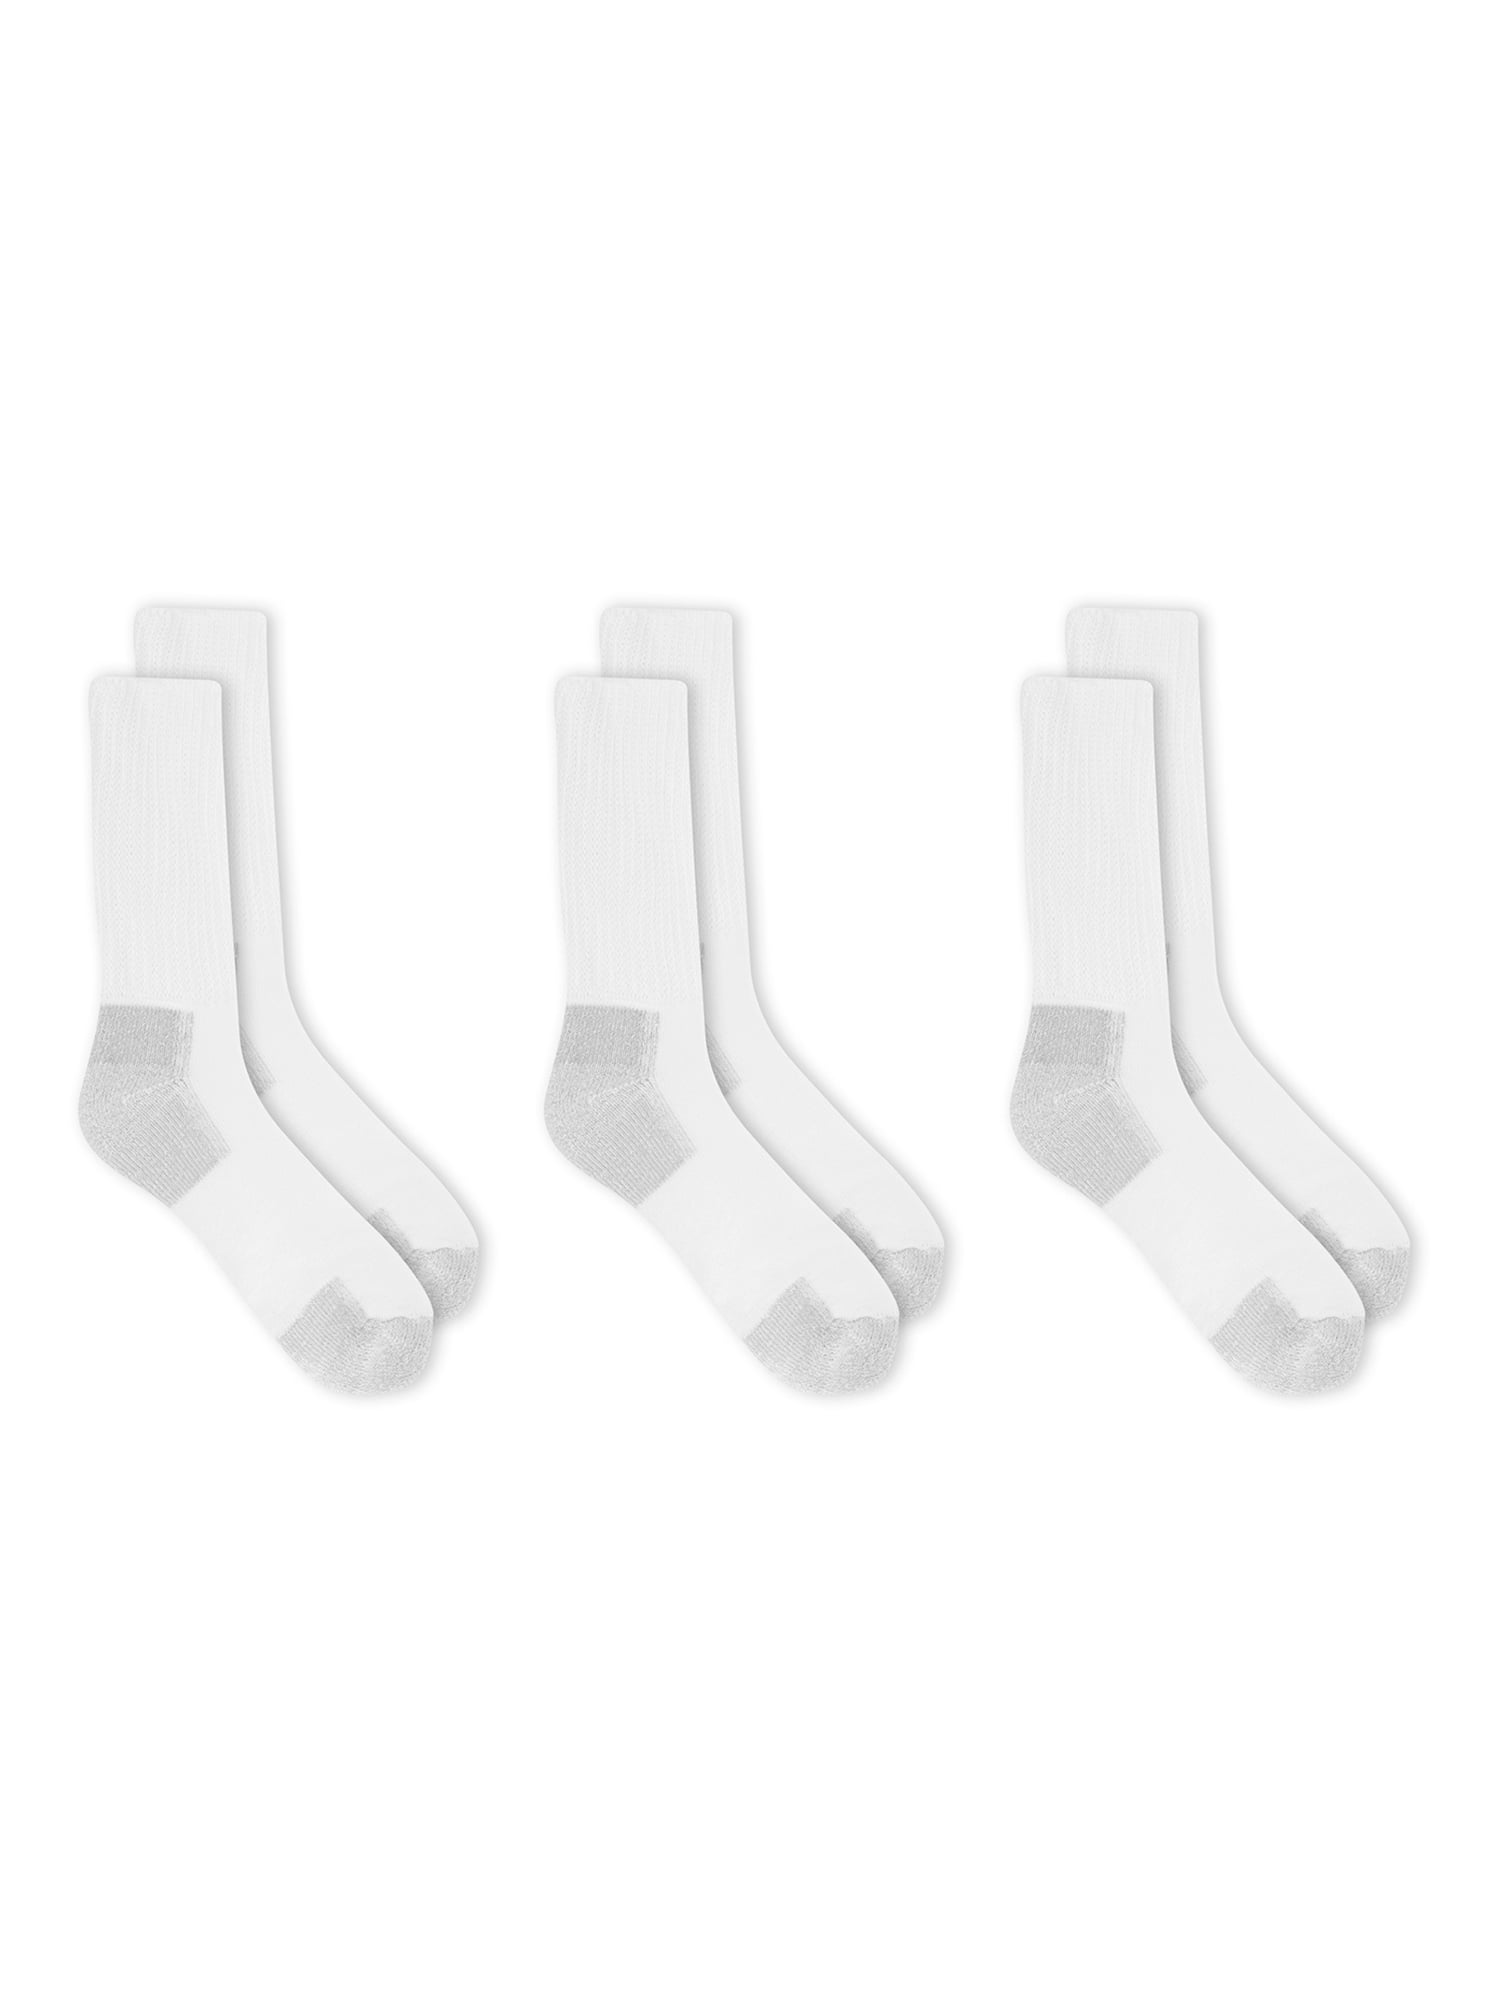 Dr. Scholl's Men's Big and Tall Advanced Relief Blister Guard® Wide Top Crew Socks, 3 Pack